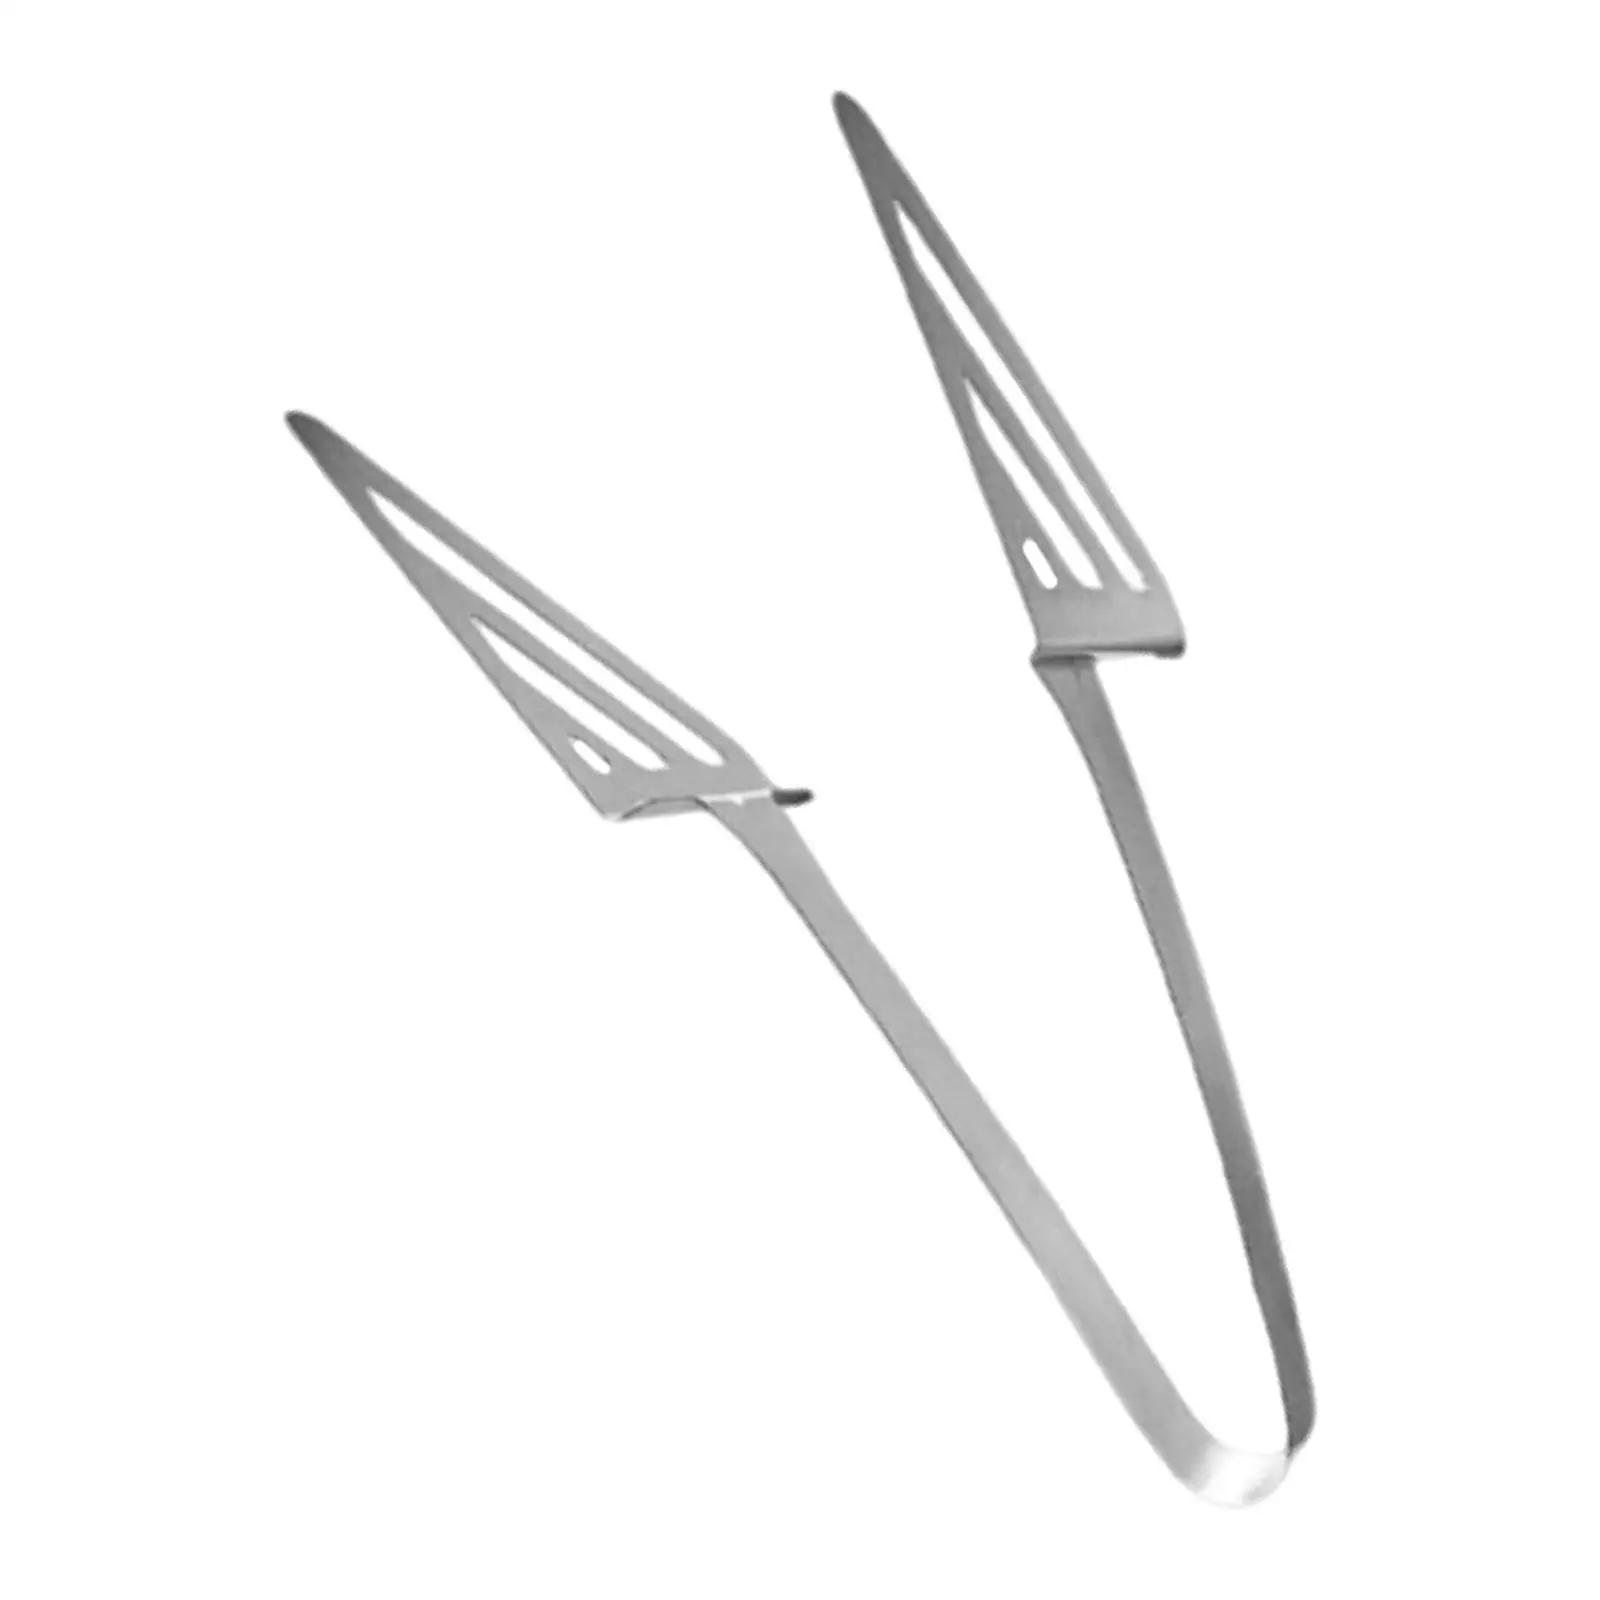 Kitchen Tongs Stainless Steel Pastry Serving Tongs for BBQ Picnic Party